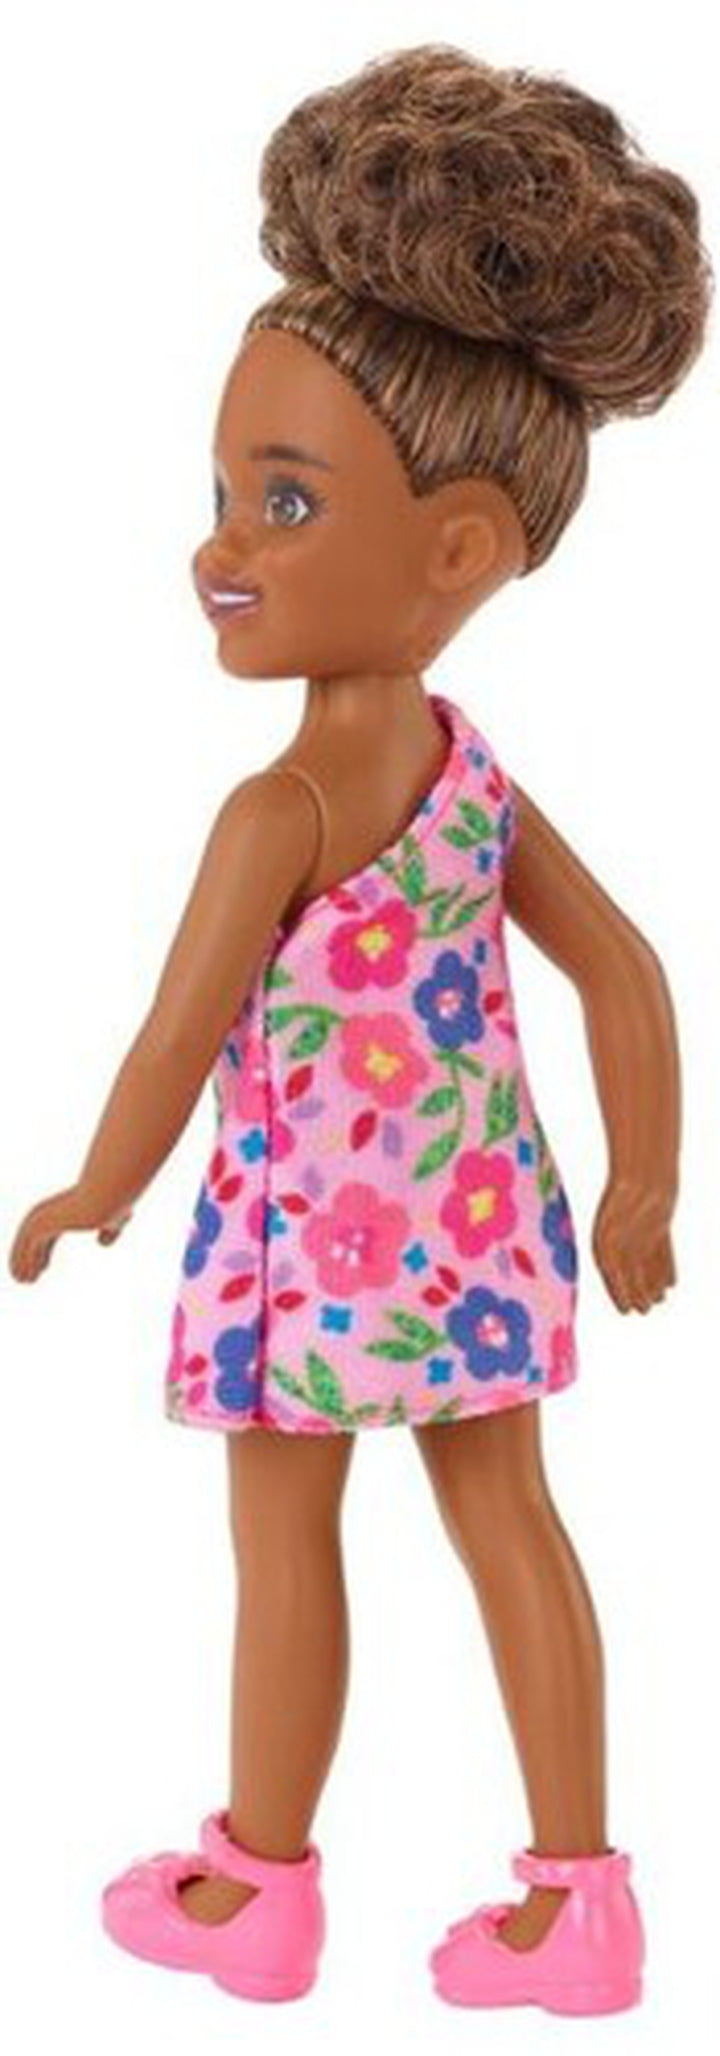 Mattel - Barbie Chelsea Doll with Pink Flowers Dress, African American